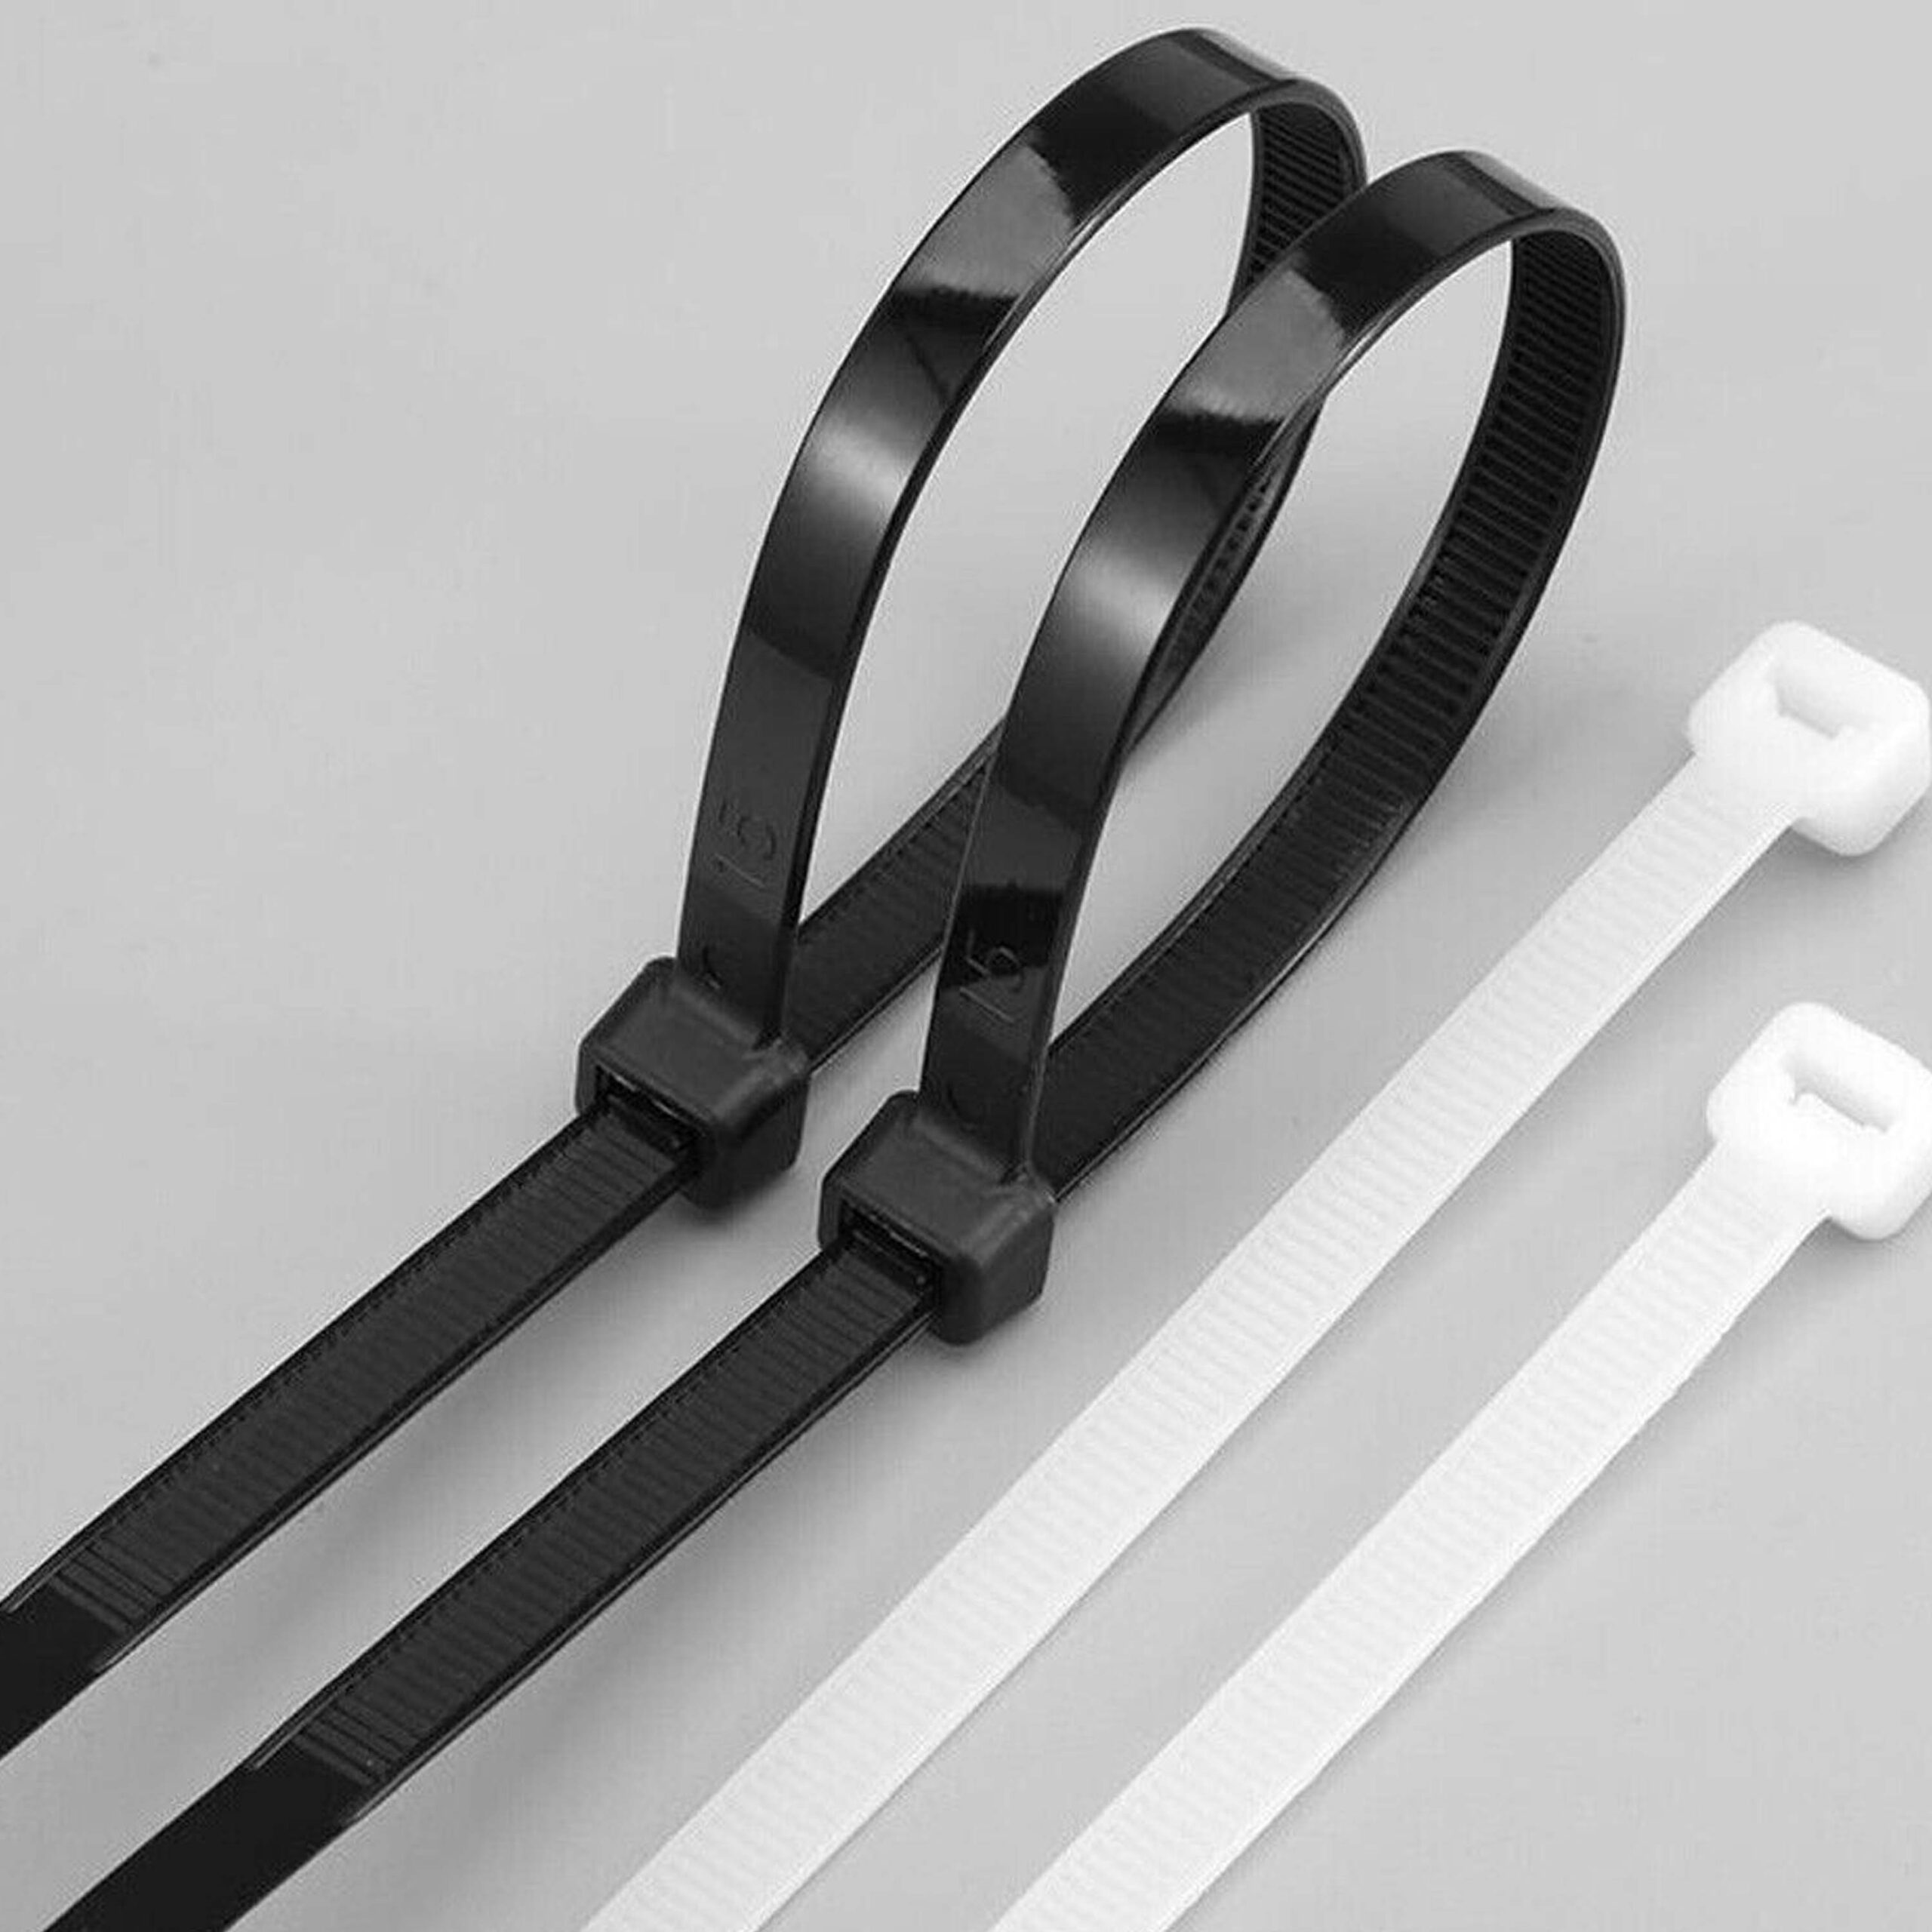 CABLE TIES
BLACK/WHITE
300mm x 3.6mm
(1x100)